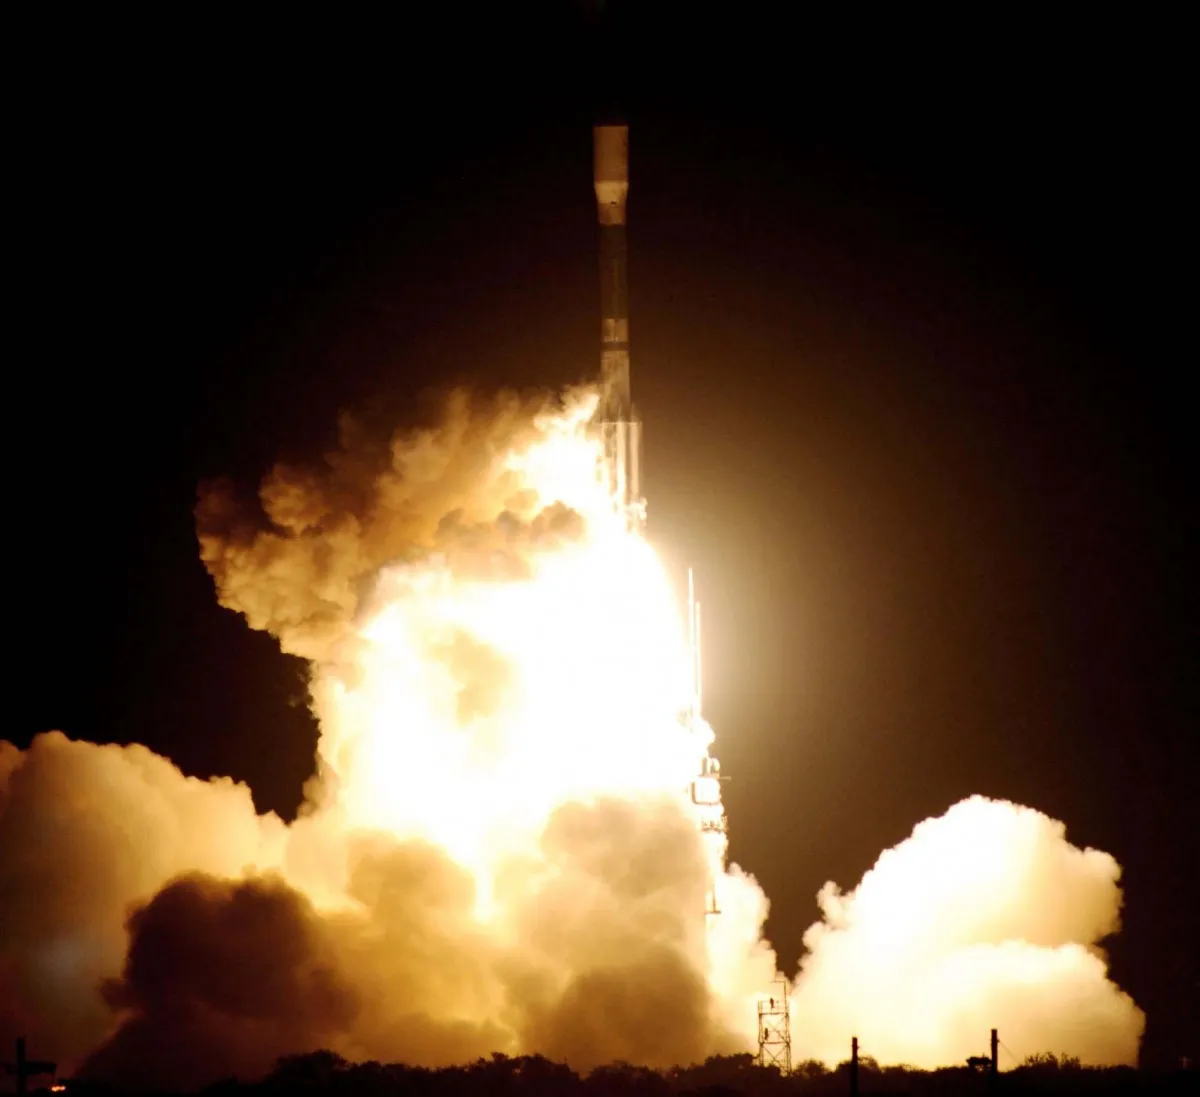 The Delta II rocket carrying Kepler launches from Cape Canaveral Air Force Station in Florida, 7 March 2009. Credit: NASA